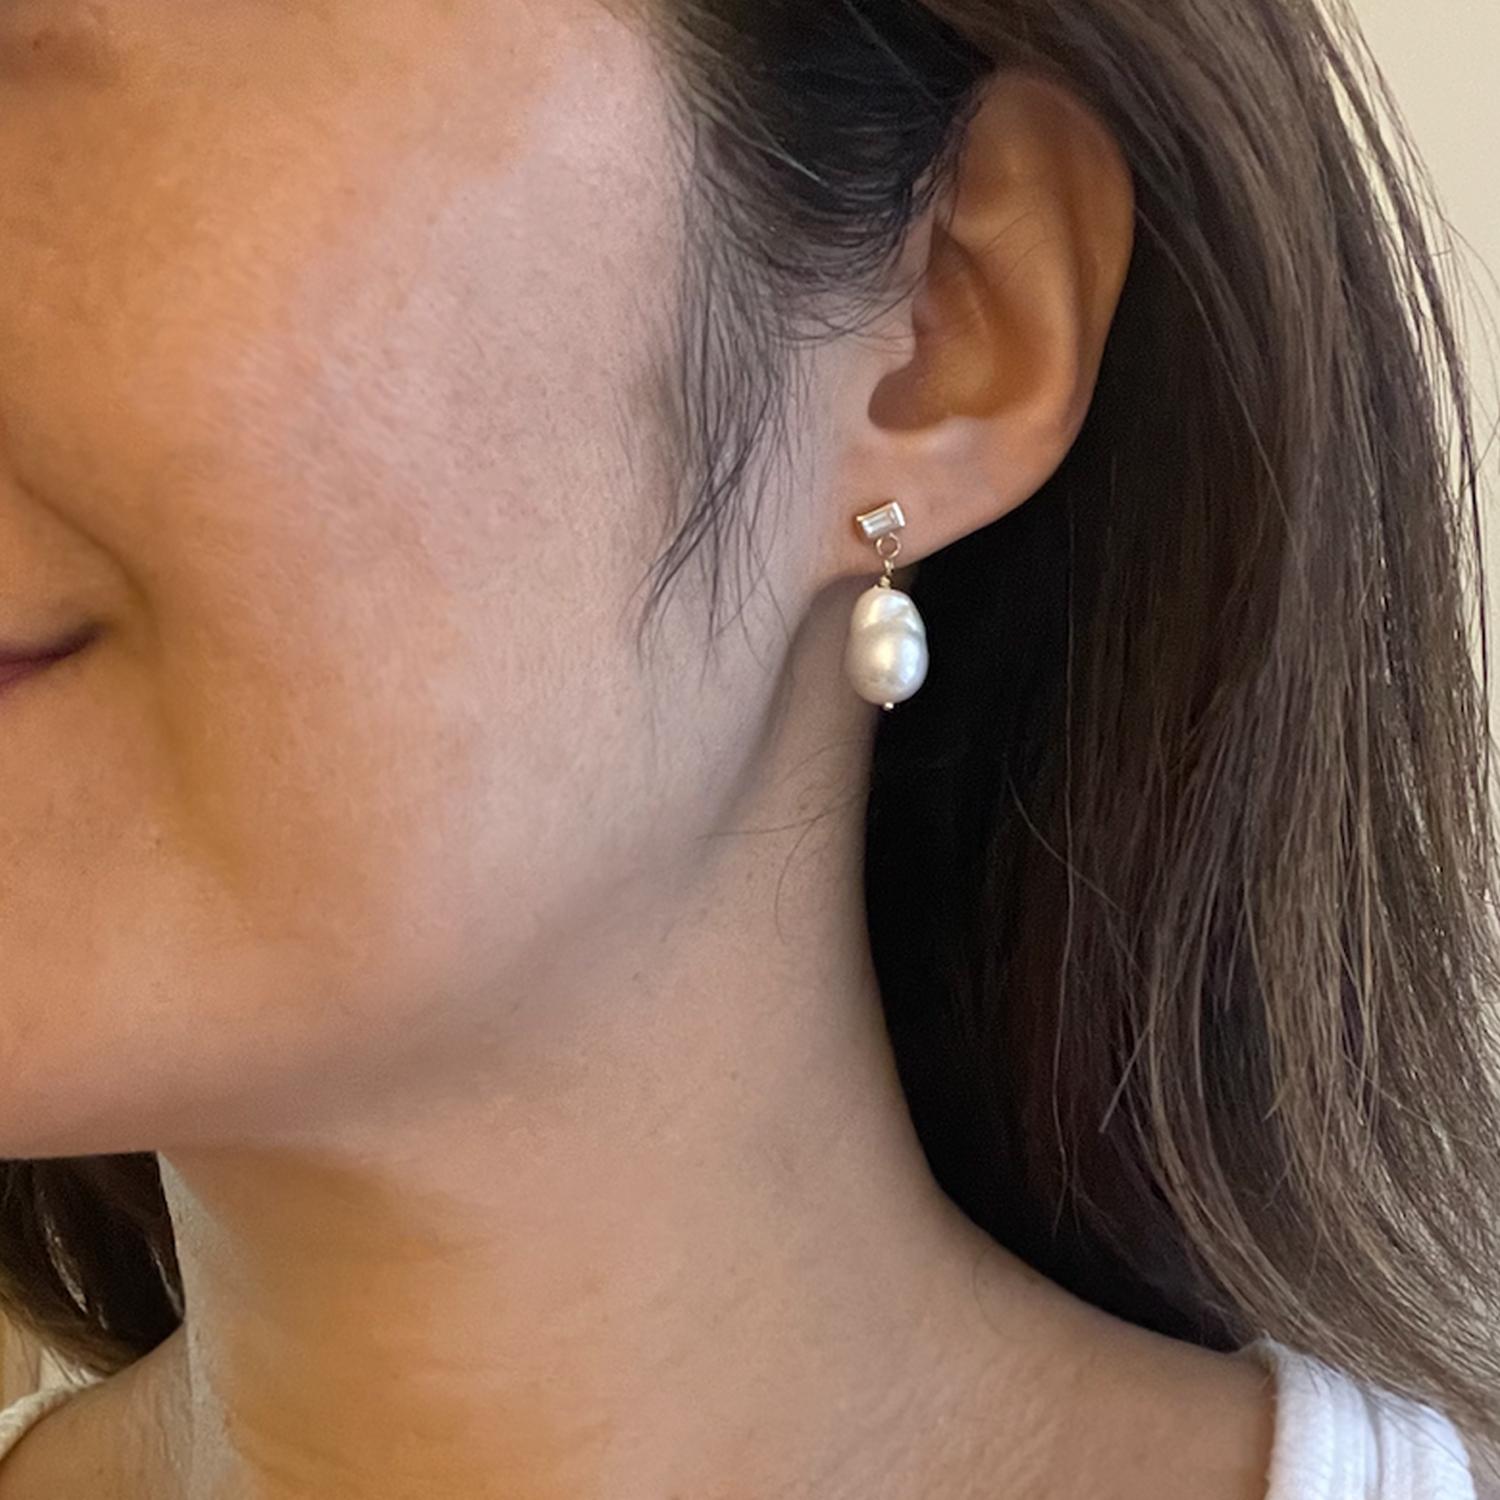 In these lustrous pearl drop earrings, a medium size gorgeous baroque pearl hangs from a VS1 quality baguette diamond stud earring. Pearls are the only gemstone that come from a living organism, and each baroque pearl shape will be slightly